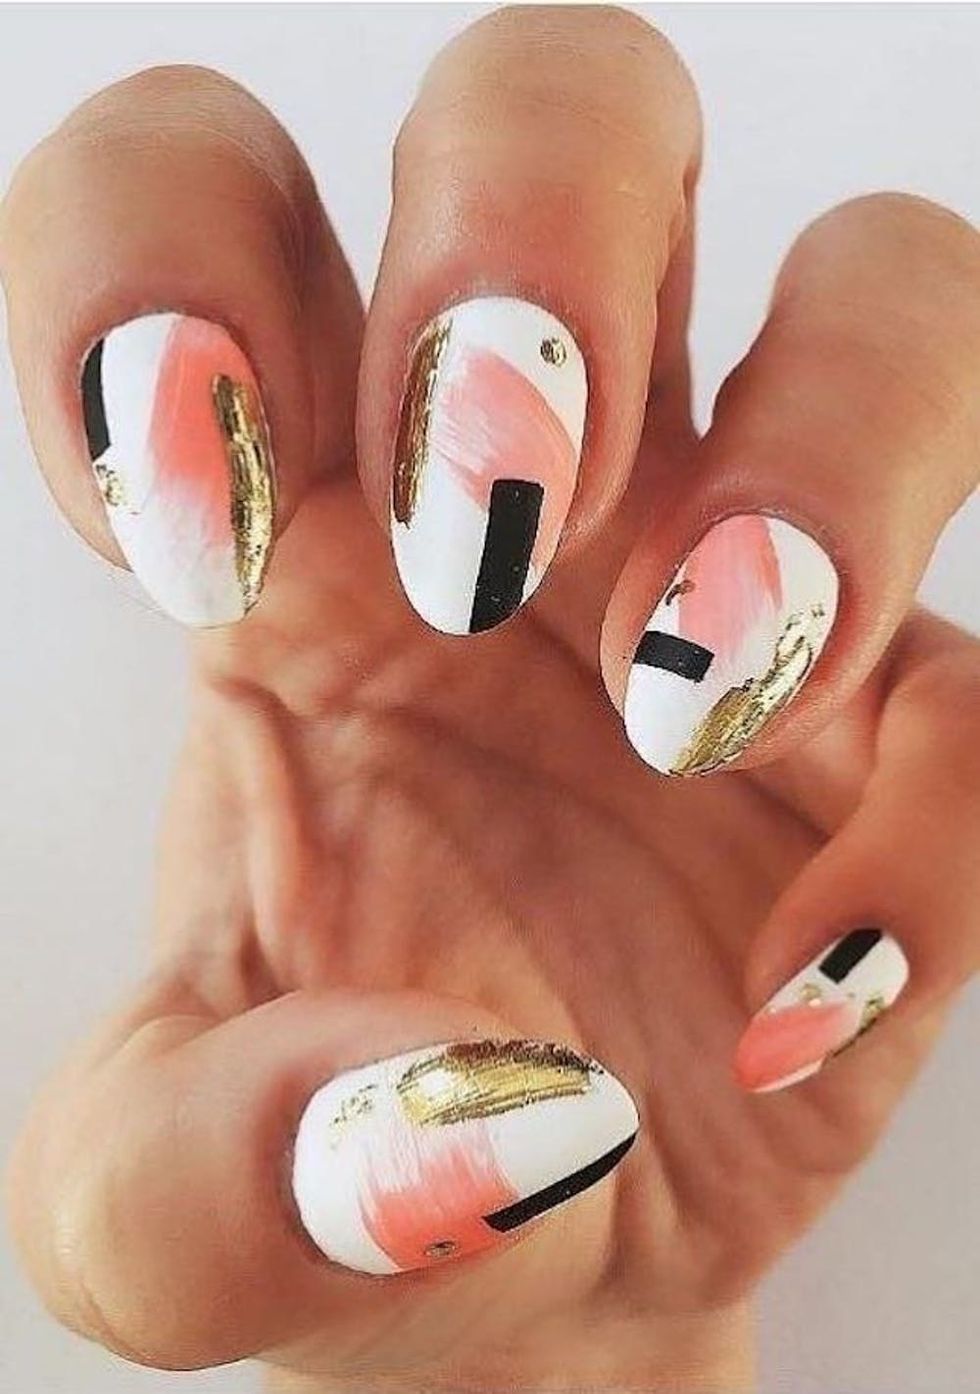 52 Pinterest-Approved Nail Art Design Ideas to Rock This Summer - Brit + Co